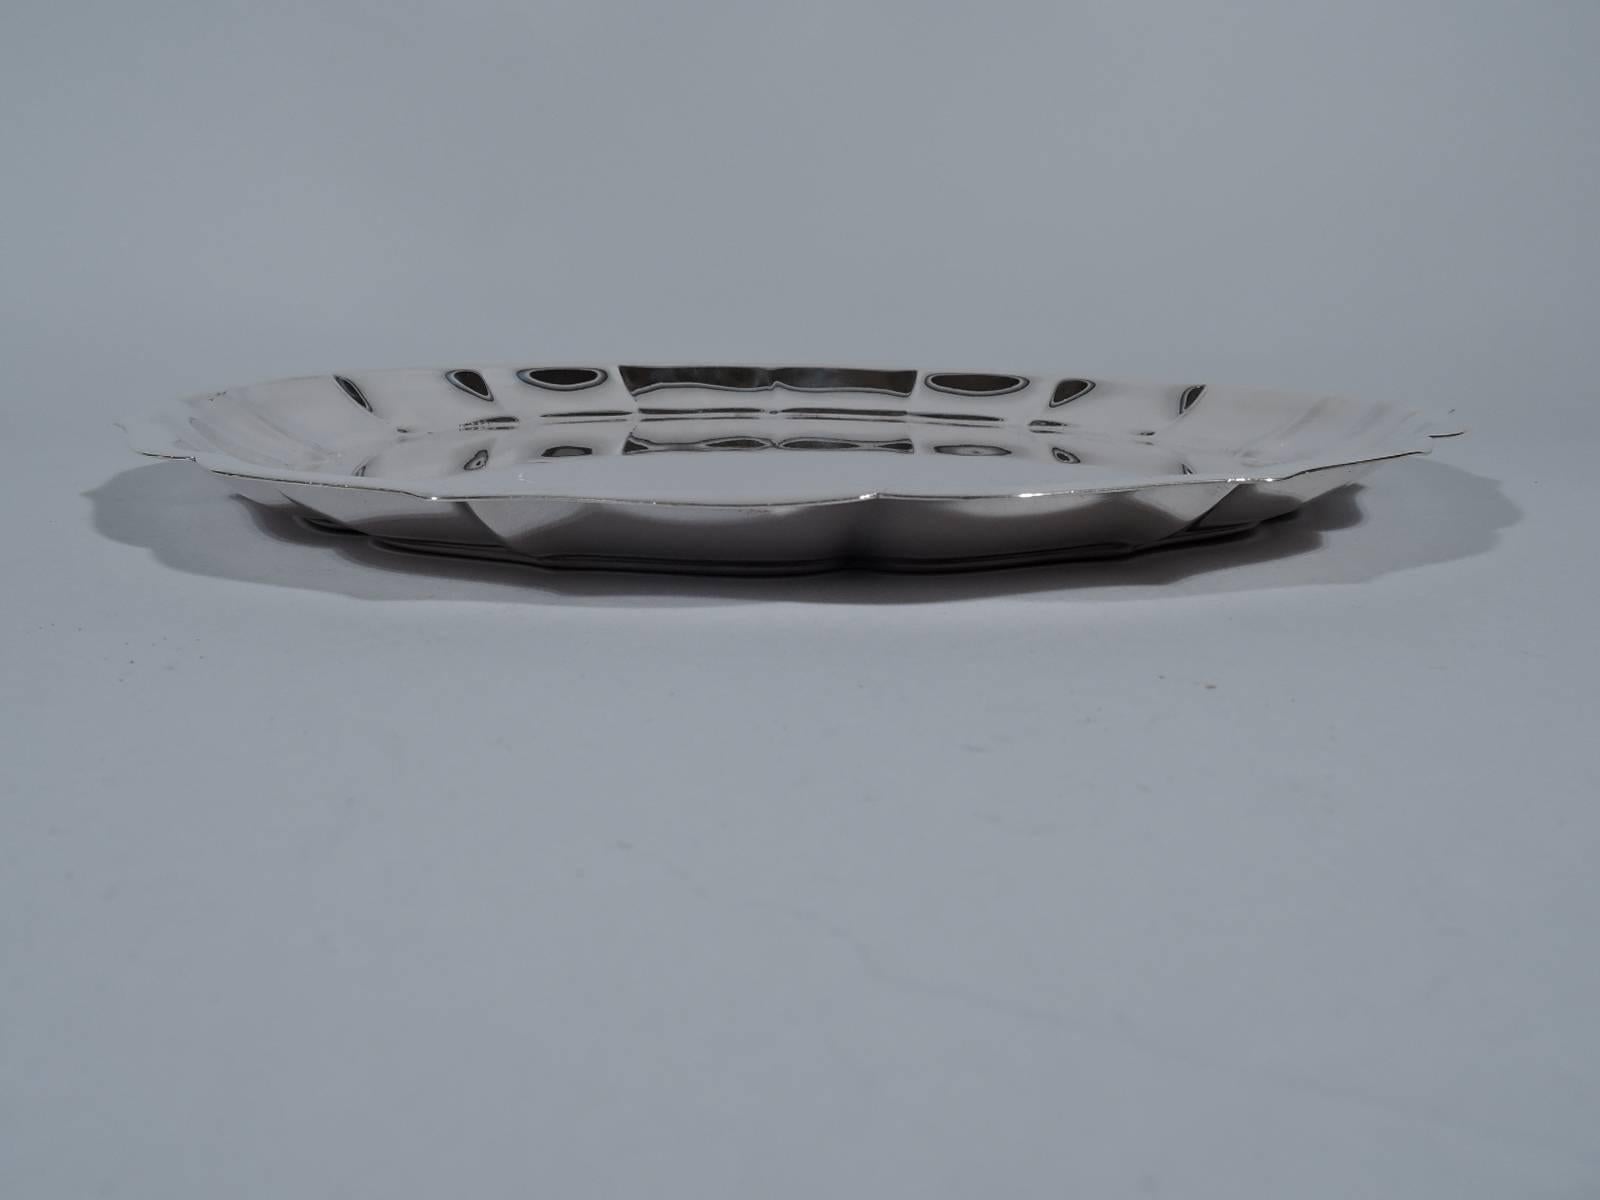 Georgian-style sterling silver tray. Made by International in Meriden, Conn. Soft piecrust rim with ogee arches. Hallmark includes no. W34. Weight: 13.4 troy ounces.